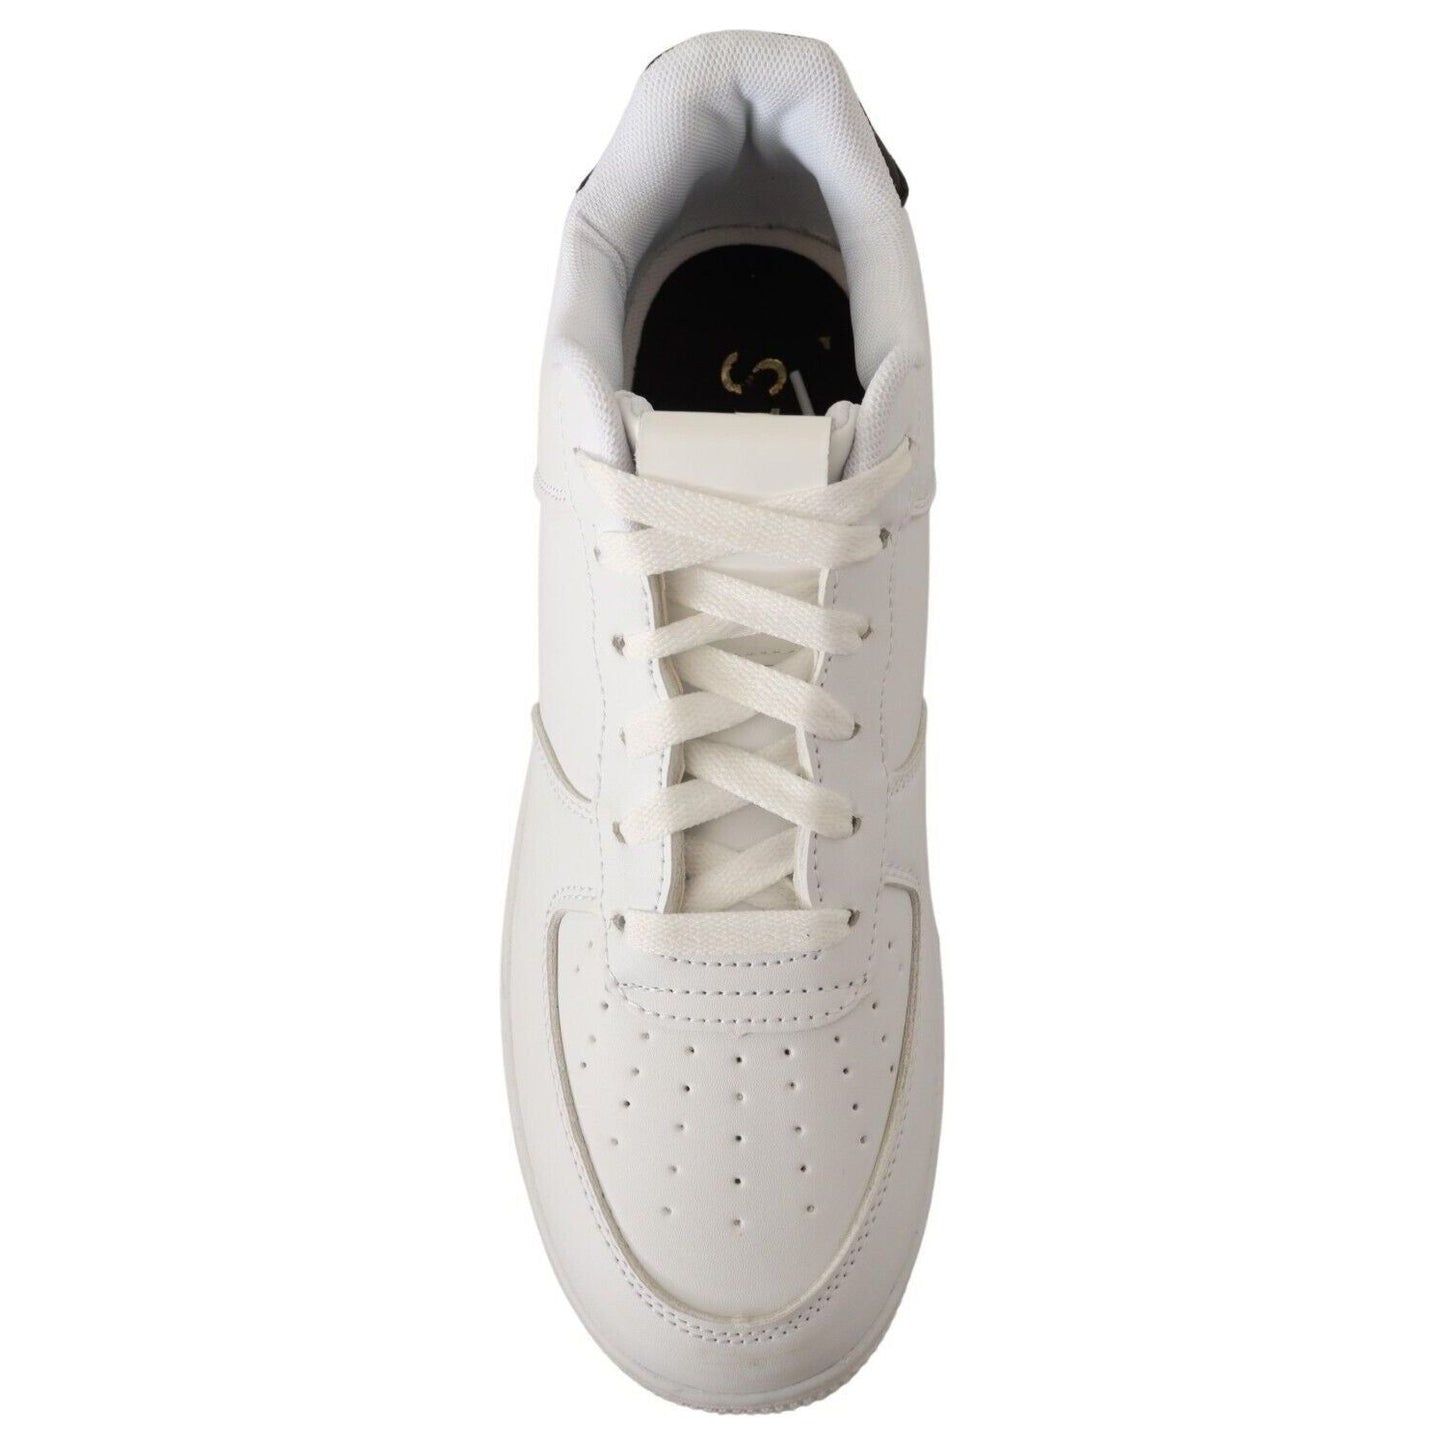 SIGNS Chic White Leather Low Top Sneakers white-leather-perforated-lace-up-sneakers-casual-men-shoes MAN SNEAKERS s-l1600-3-129-843e785e-1b0.jpg